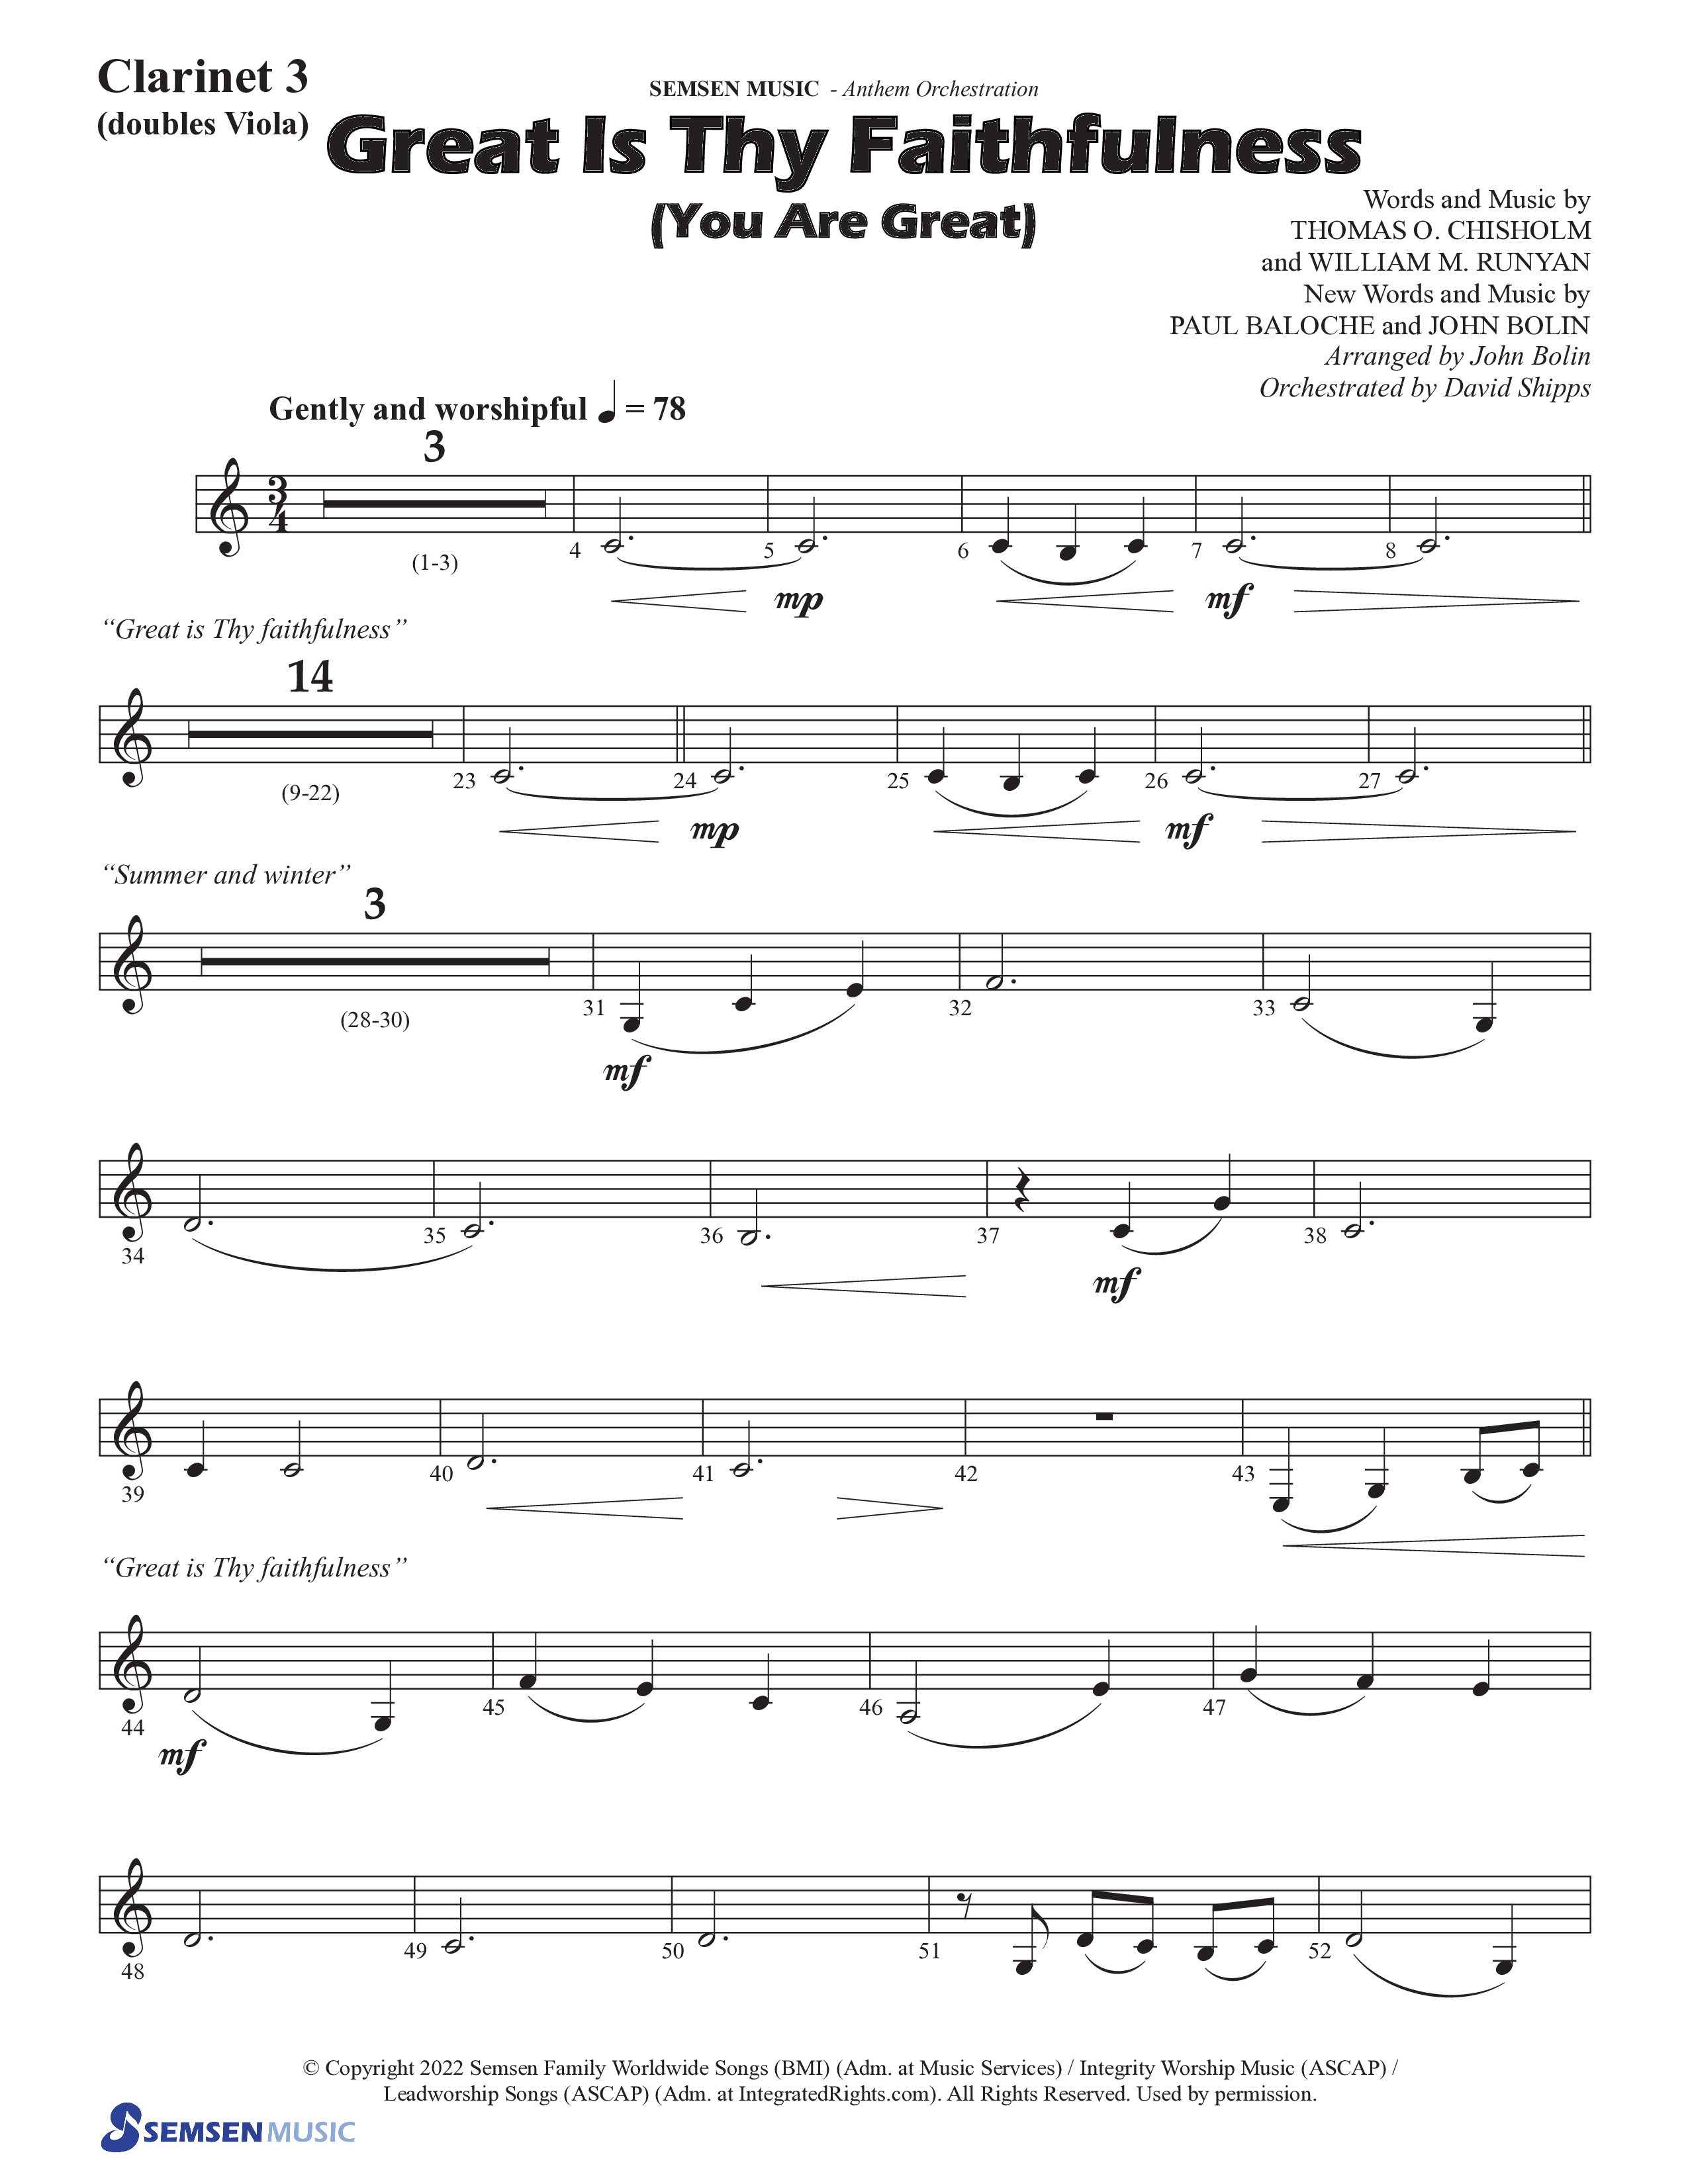 Great Is Thy Faithfulness (You Are Great) (Choral Anthem SATB) Clarinet 3 (Semsen Music / Arr. John Bolin / Orch. David Shipps)